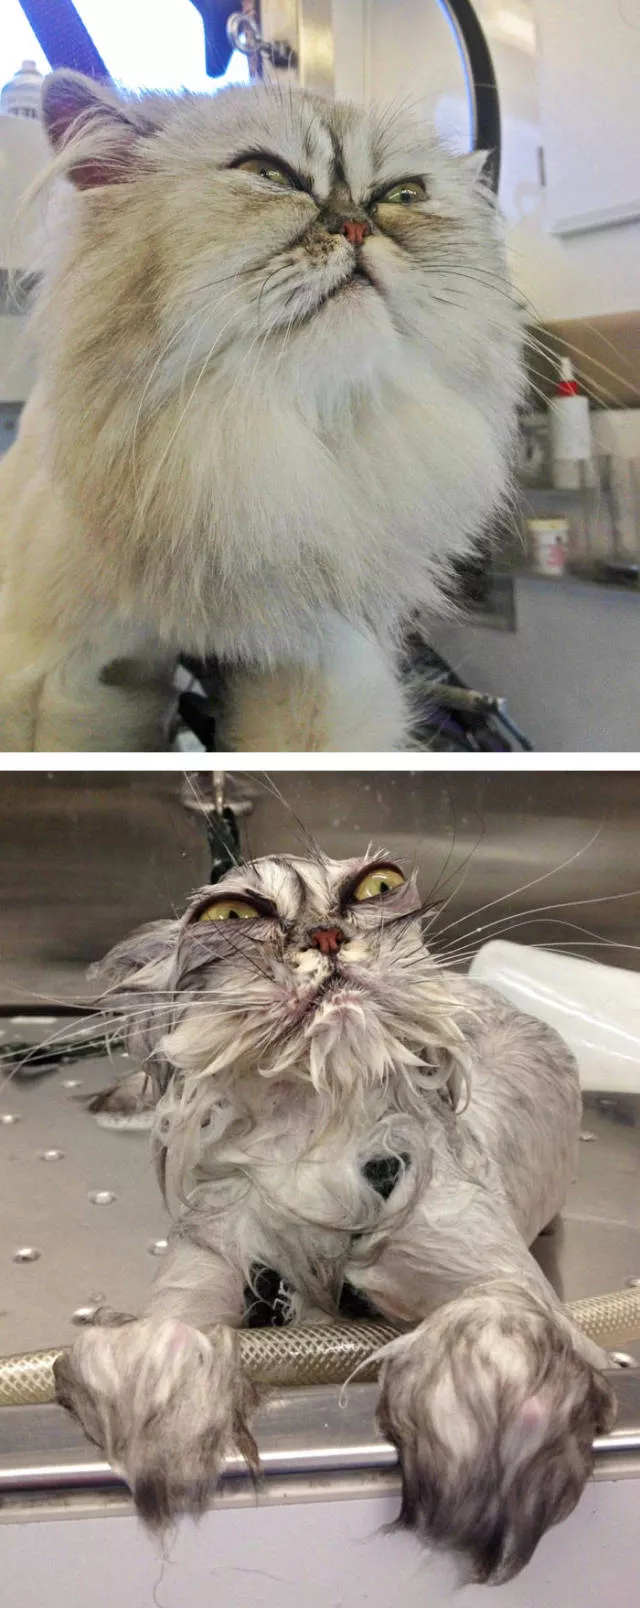 Hilarious photos of animals before and after a bath - #26 